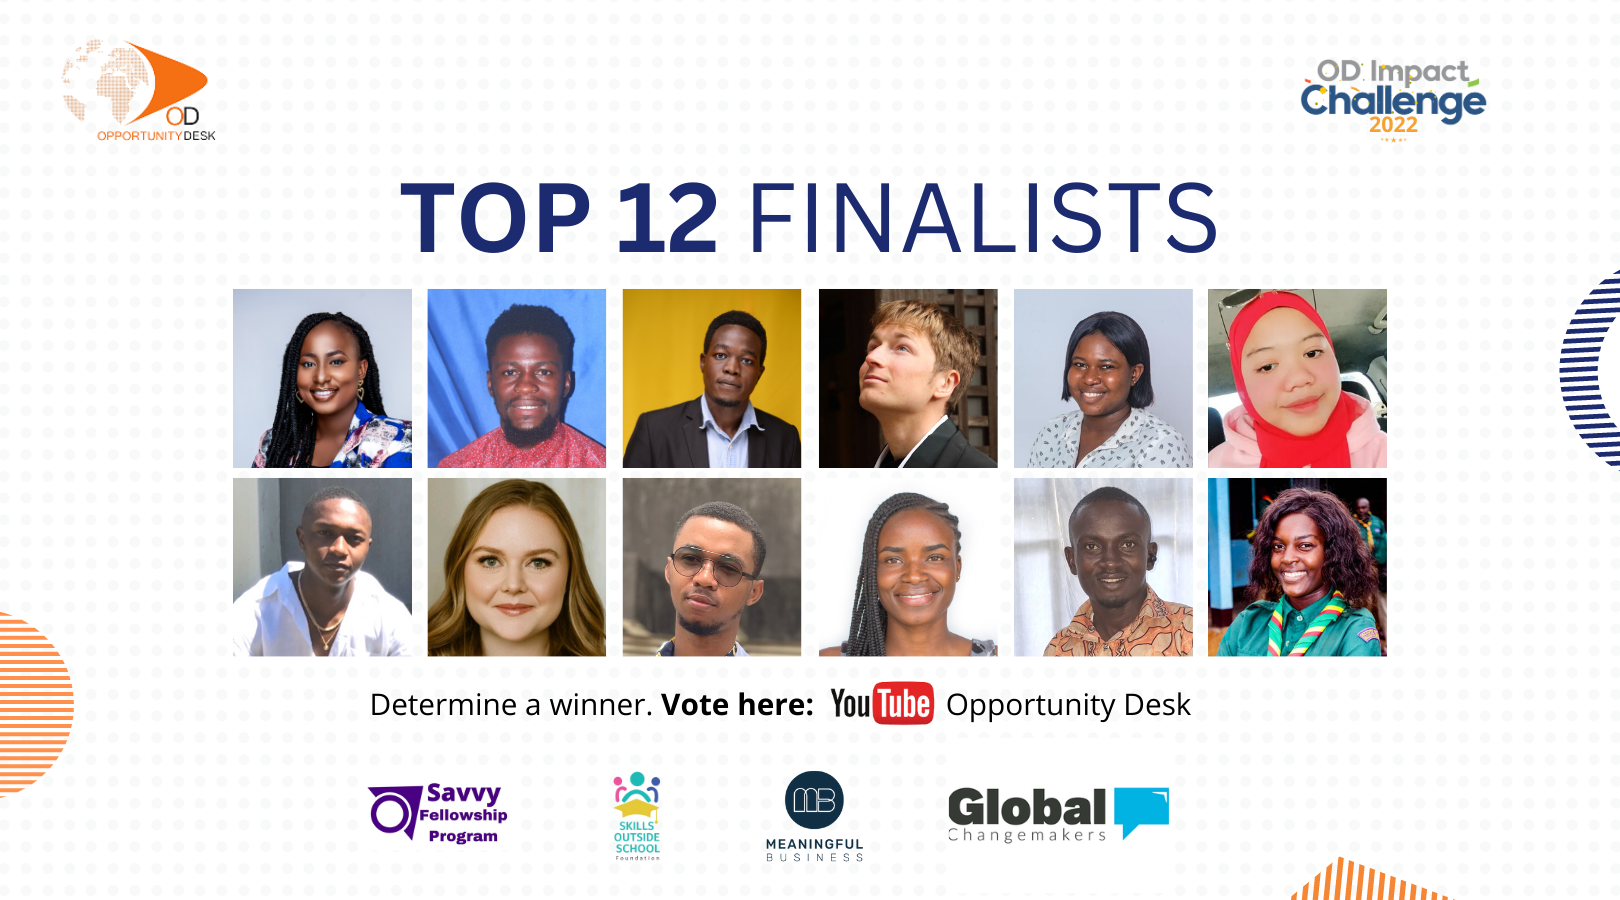 Announcing the OD Impact Challenge 2022 Top 12 Finalists!